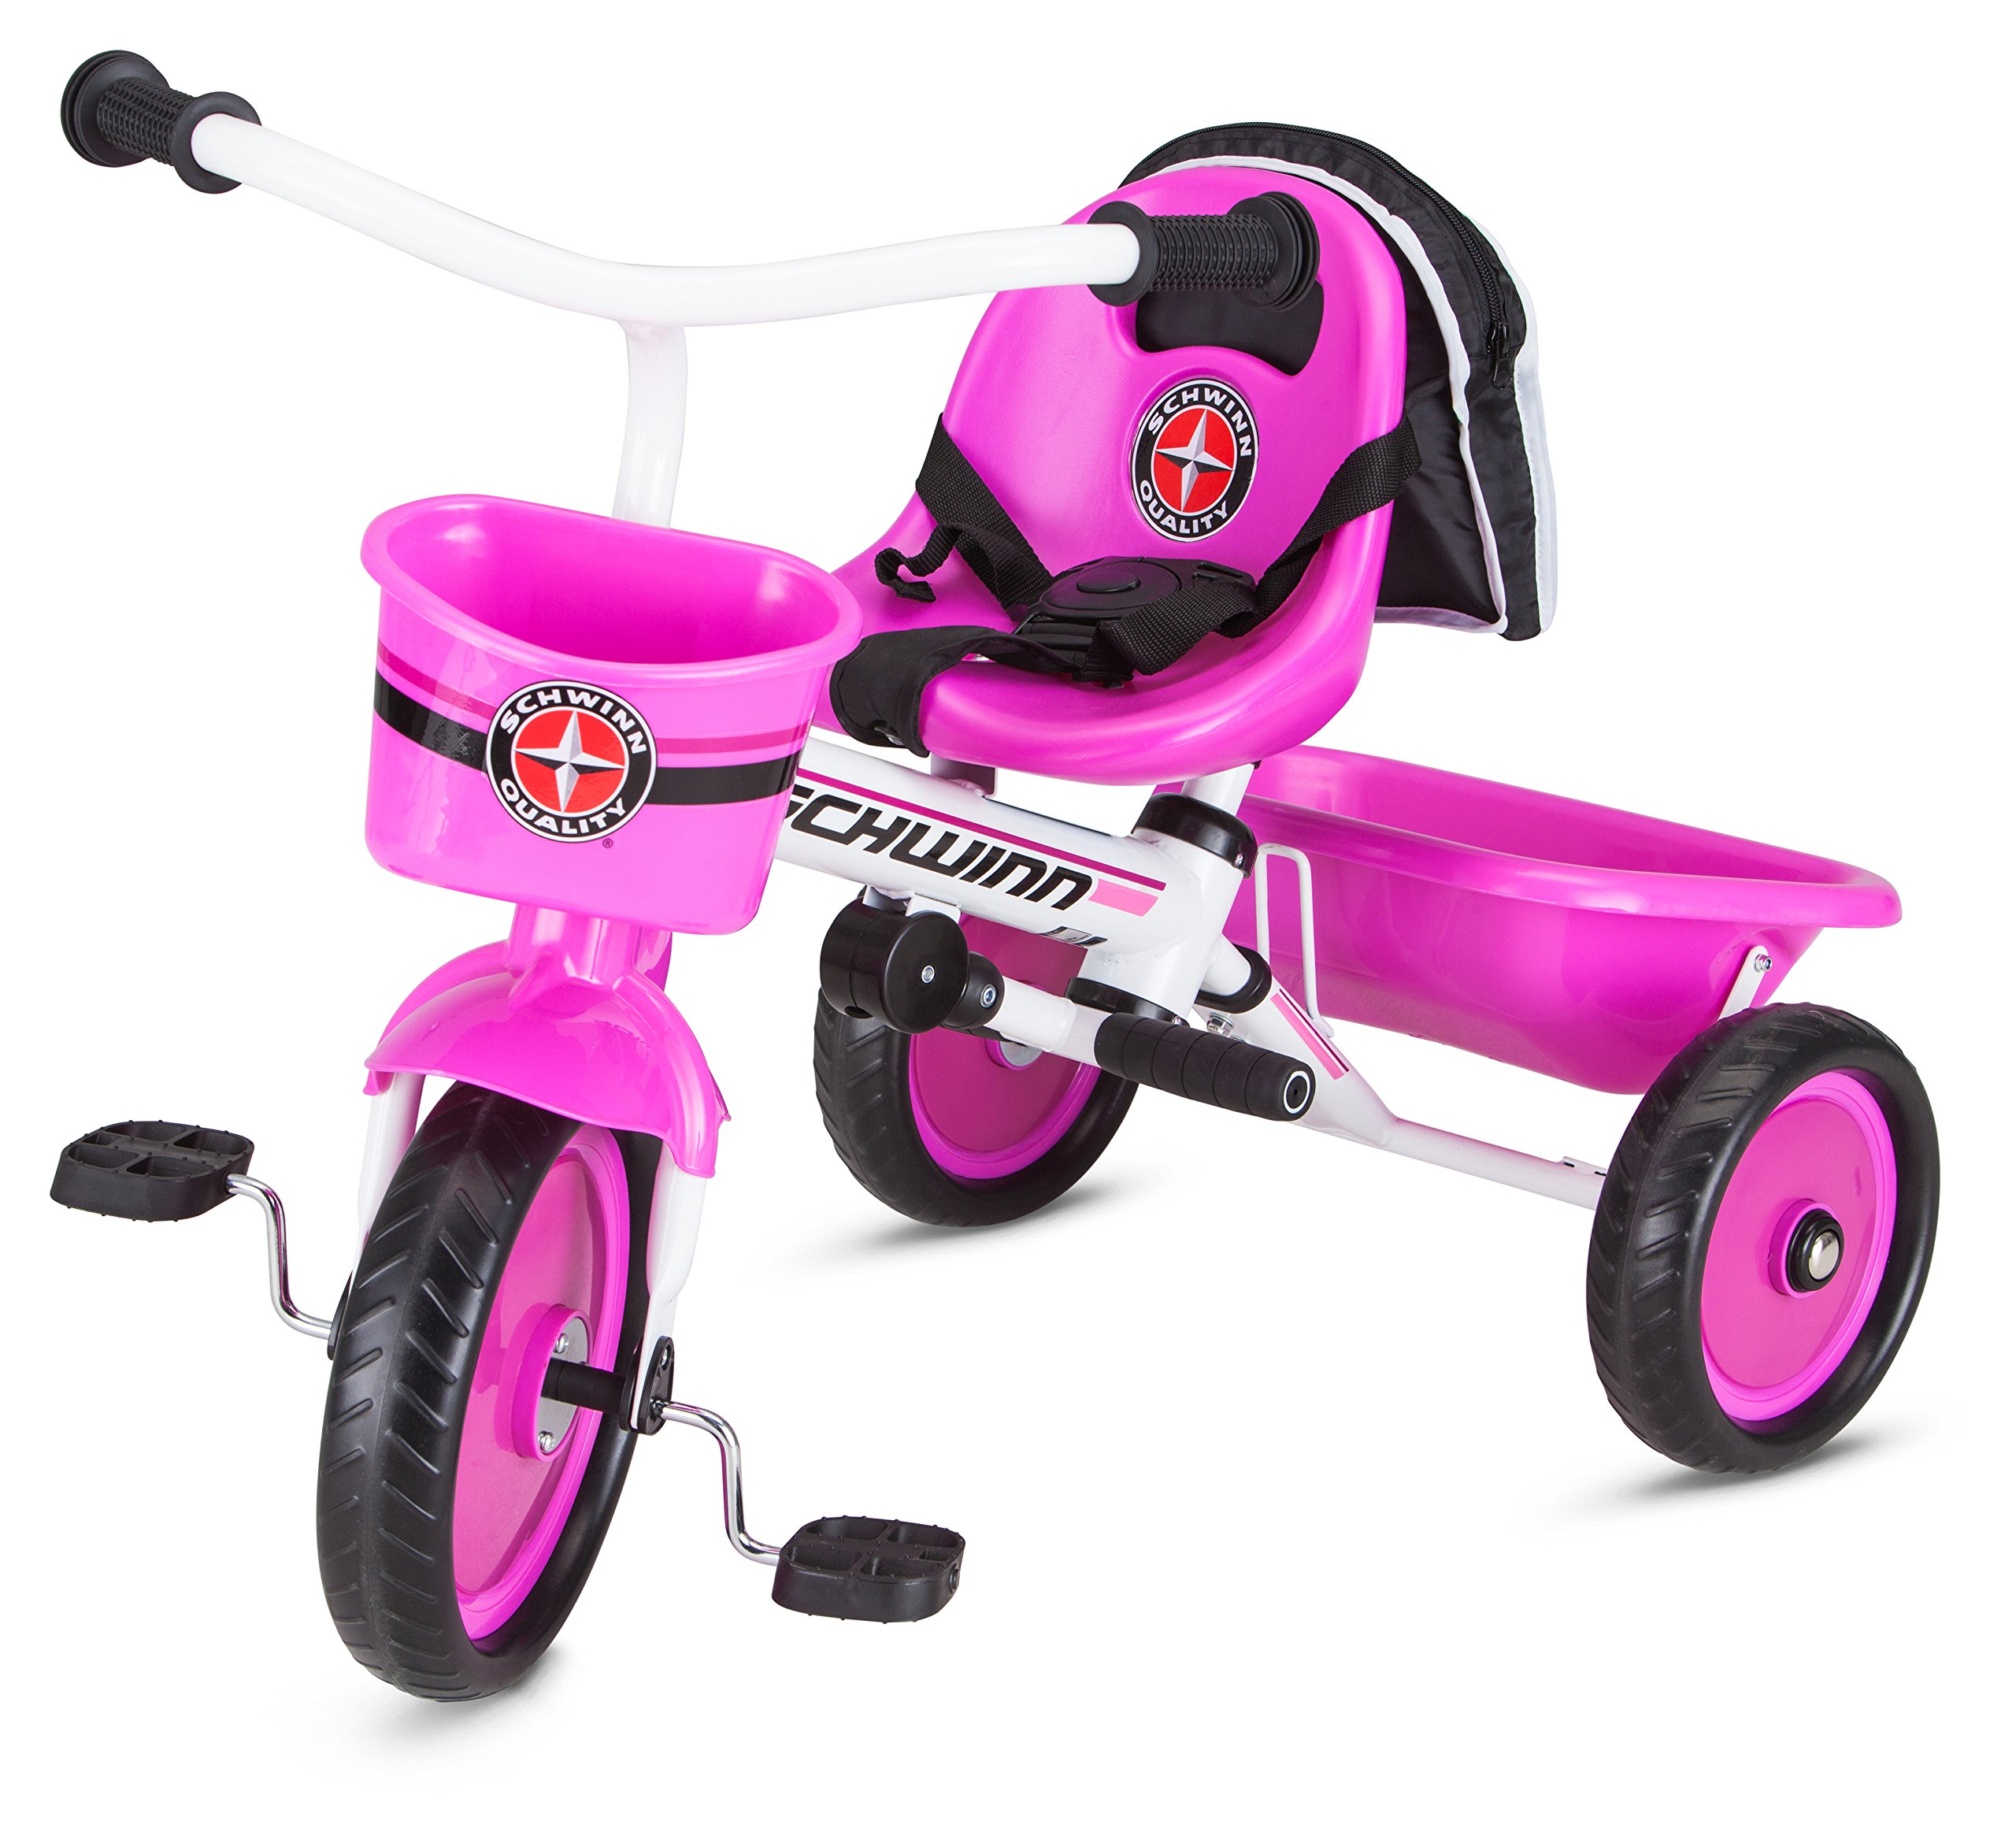 Schwinn Easy Steer Bike for Toddler, Kids Tricycle with Removable Push handle, Steel Trike Frame, Boys and Girls Ages 2-4 Year Old, Pink